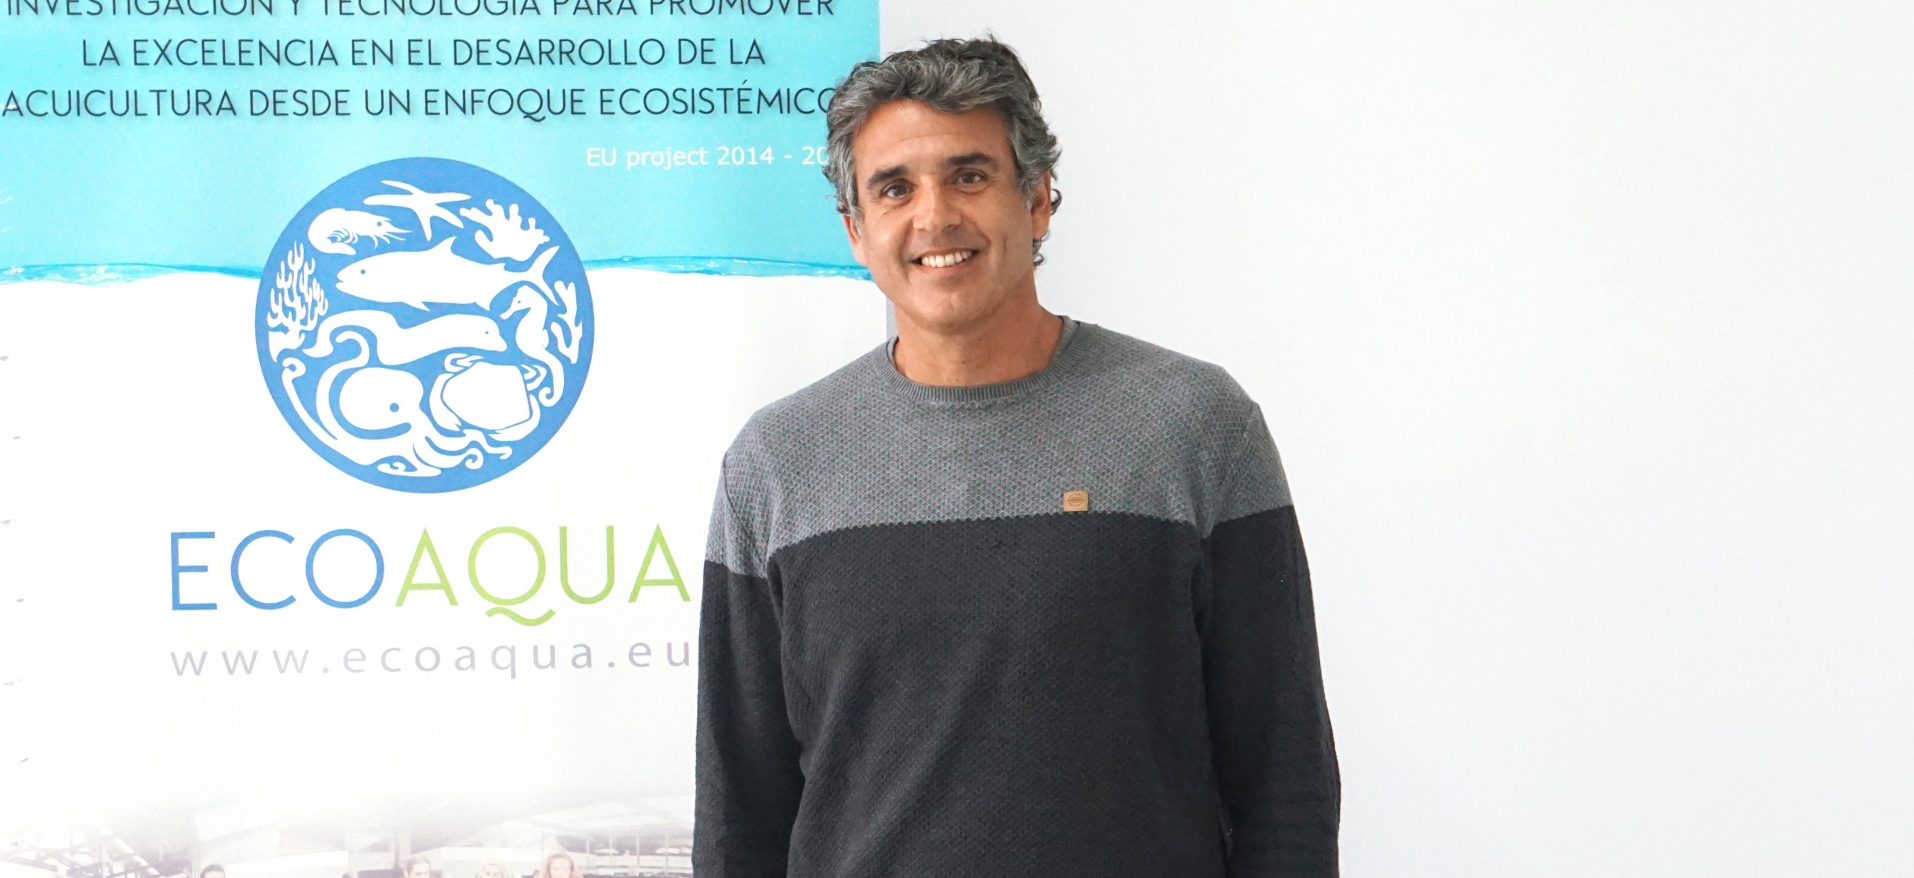 IU-ECOAQUA participates in an IUCN webinar to explain its research about Lanzarote's black coral forests